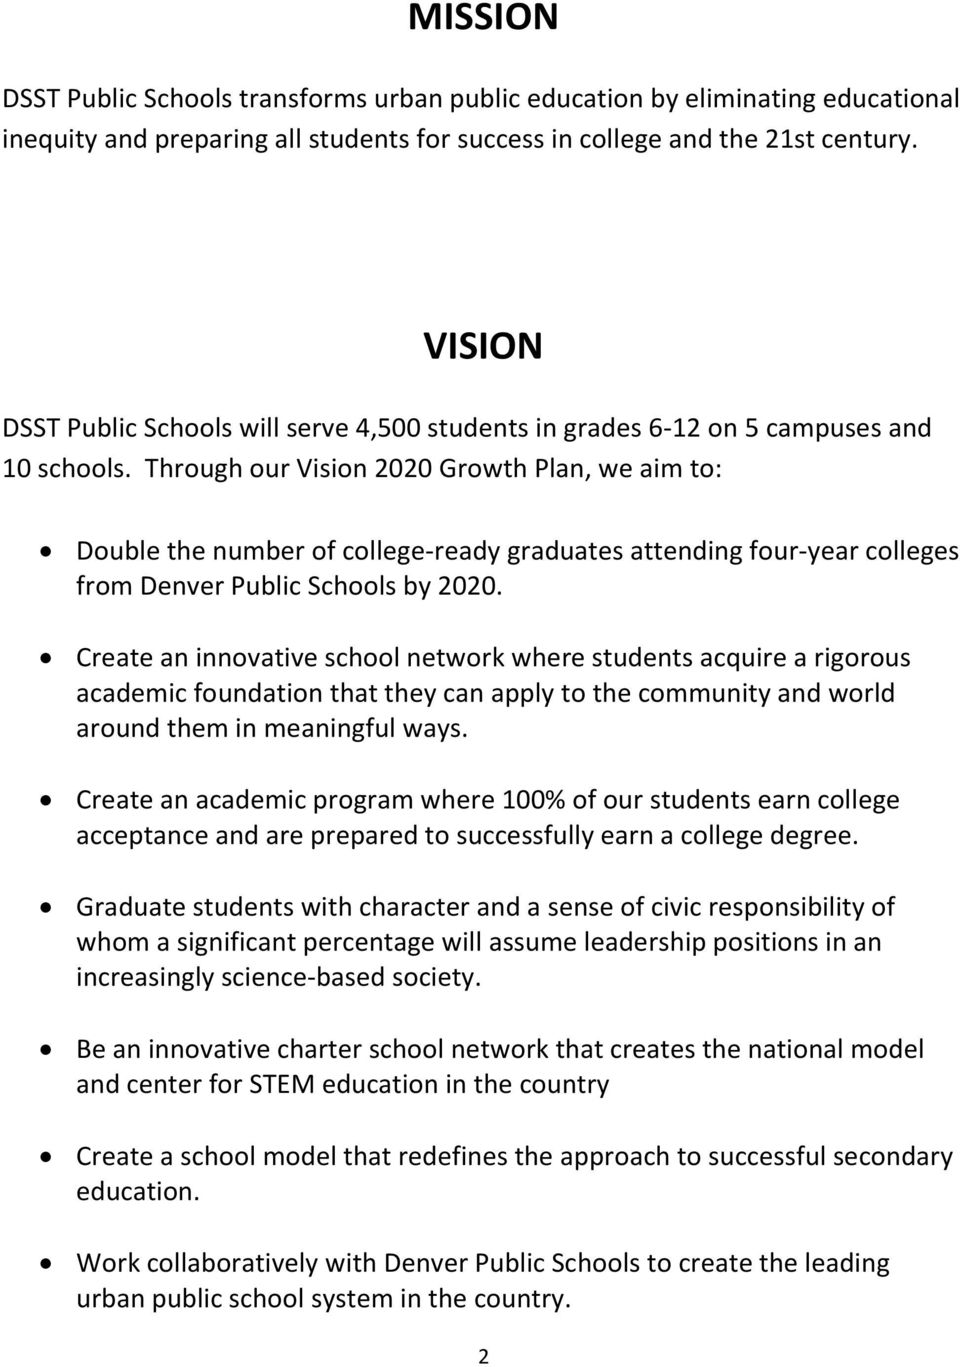 Through our Vision 2020 Growth Plan, we aim to: Double the number of college-ready graduates attending four-year colleges from Denver Public Schools by 2020.